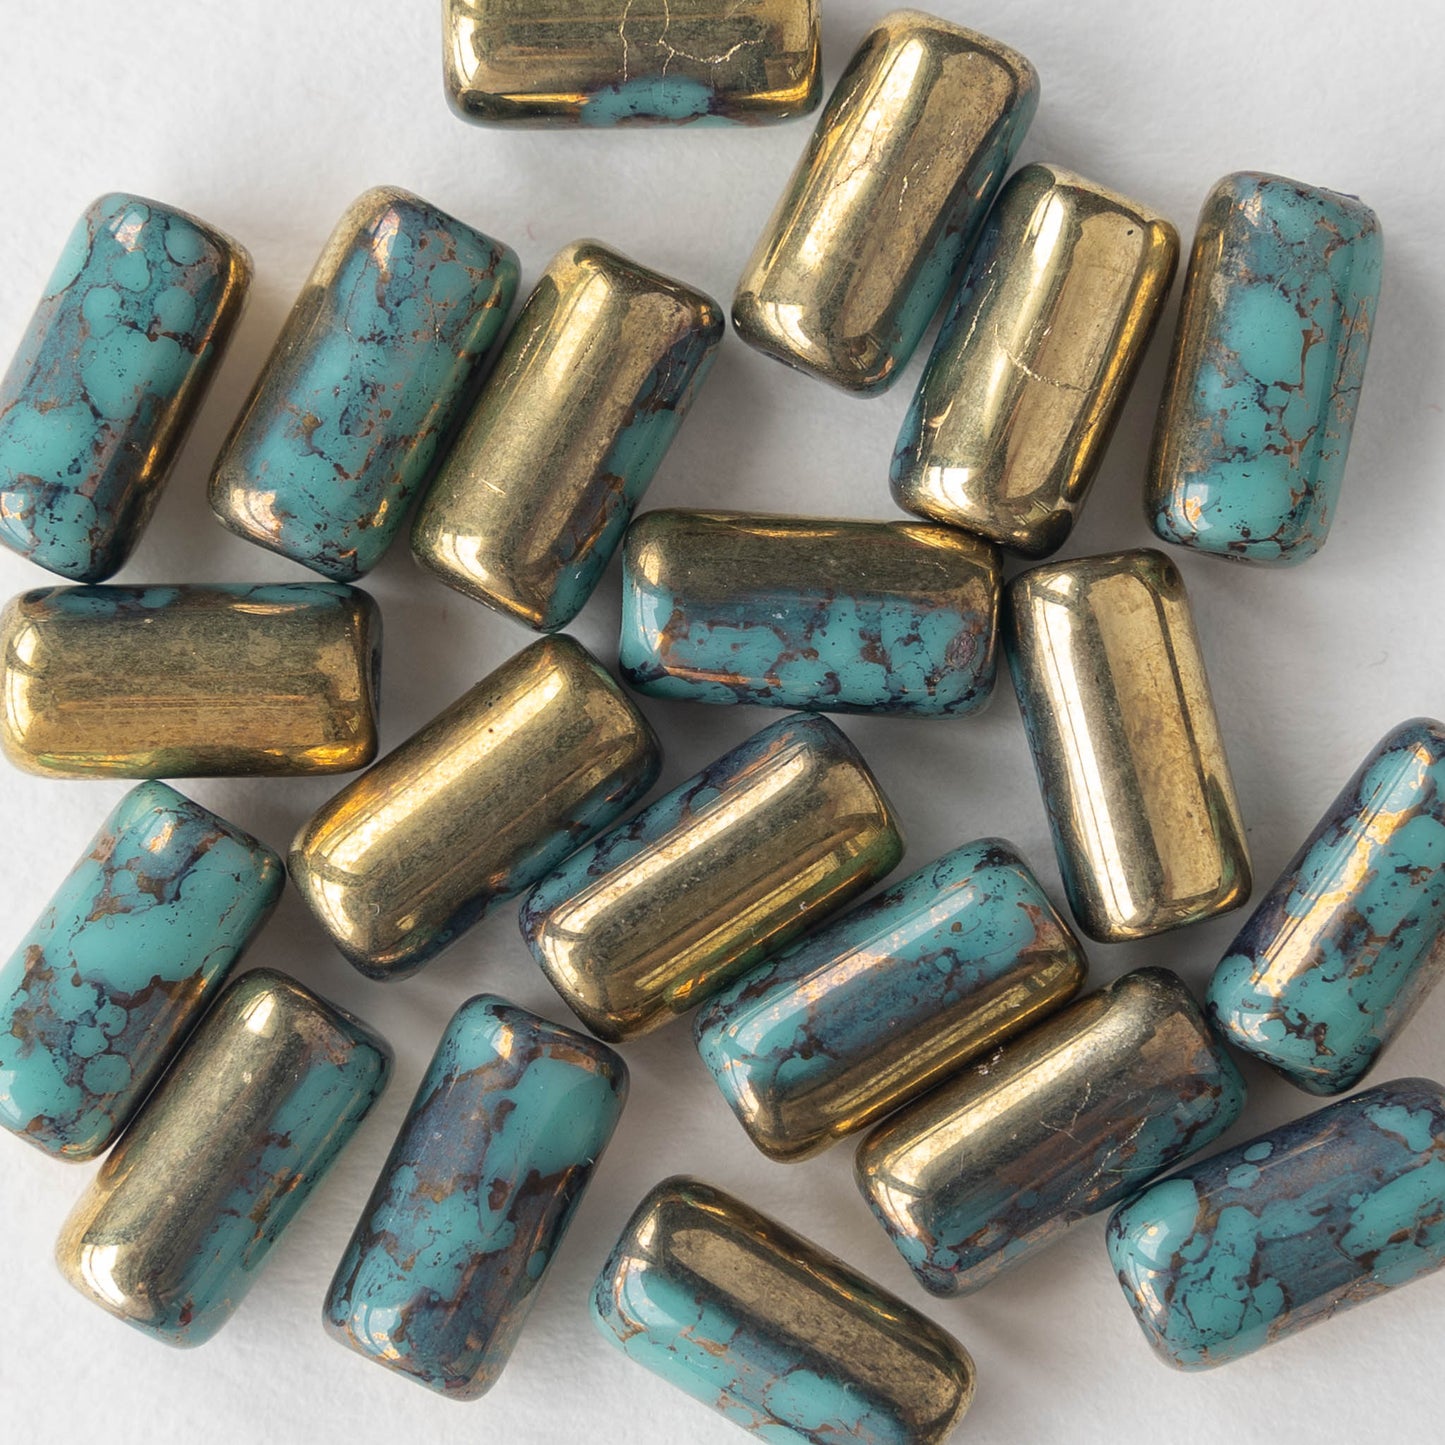 14mm Tube - Turquoise with Gold - 10 Beads